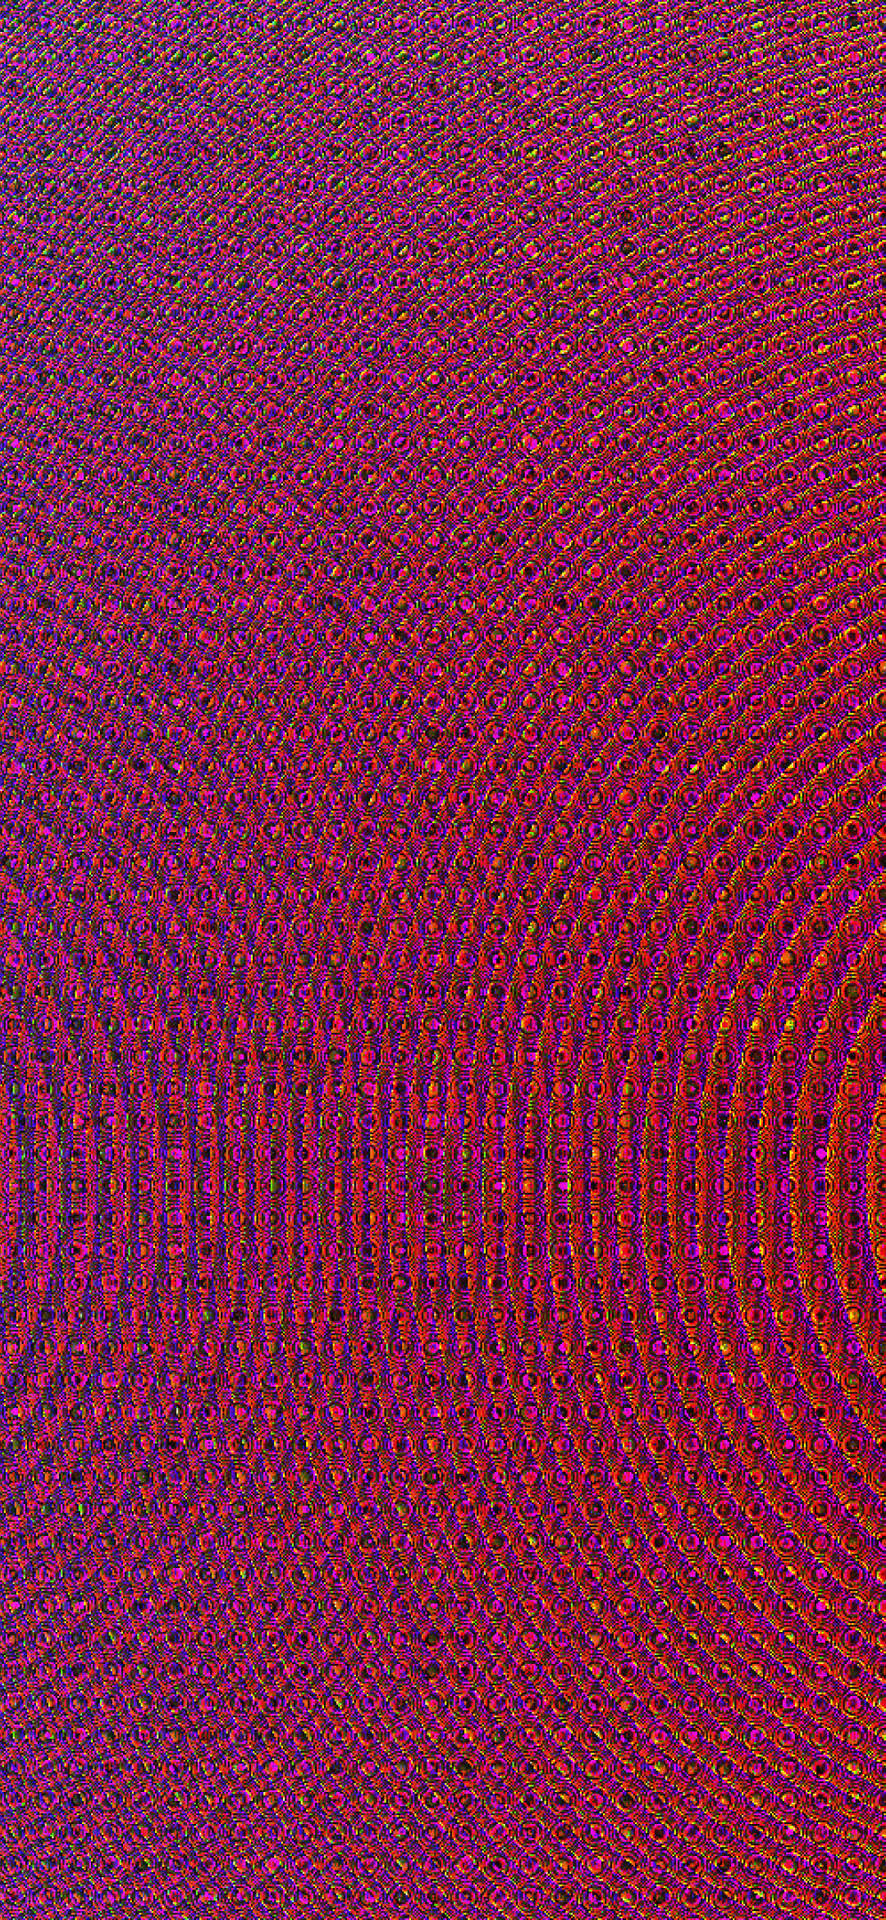 Psychedelic Iphone Abstract Patterns